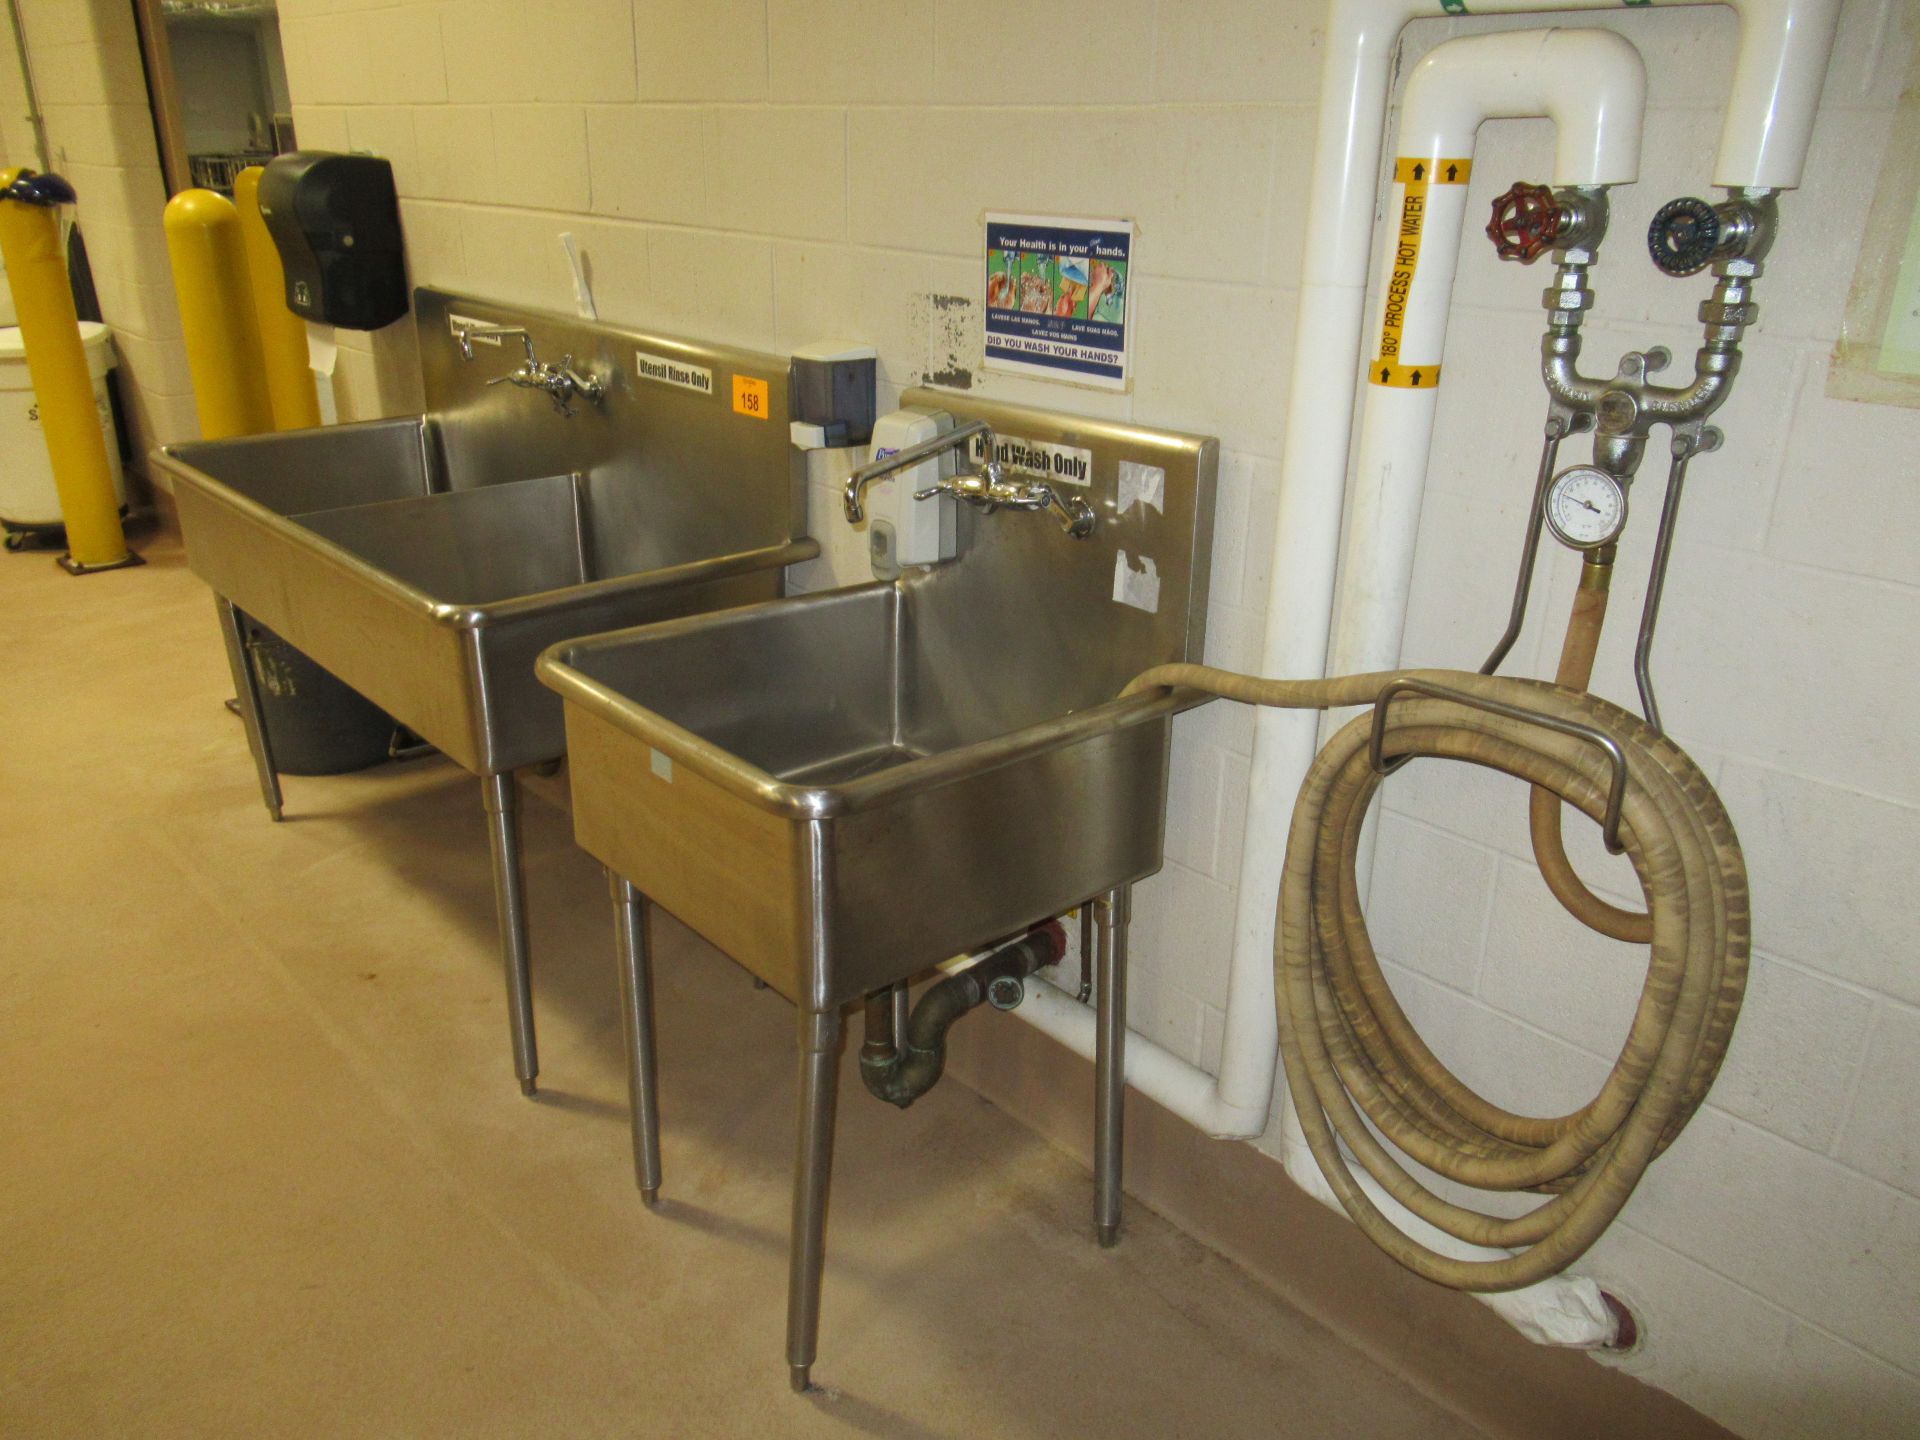 Stainless Sinks - Image 2 of 2